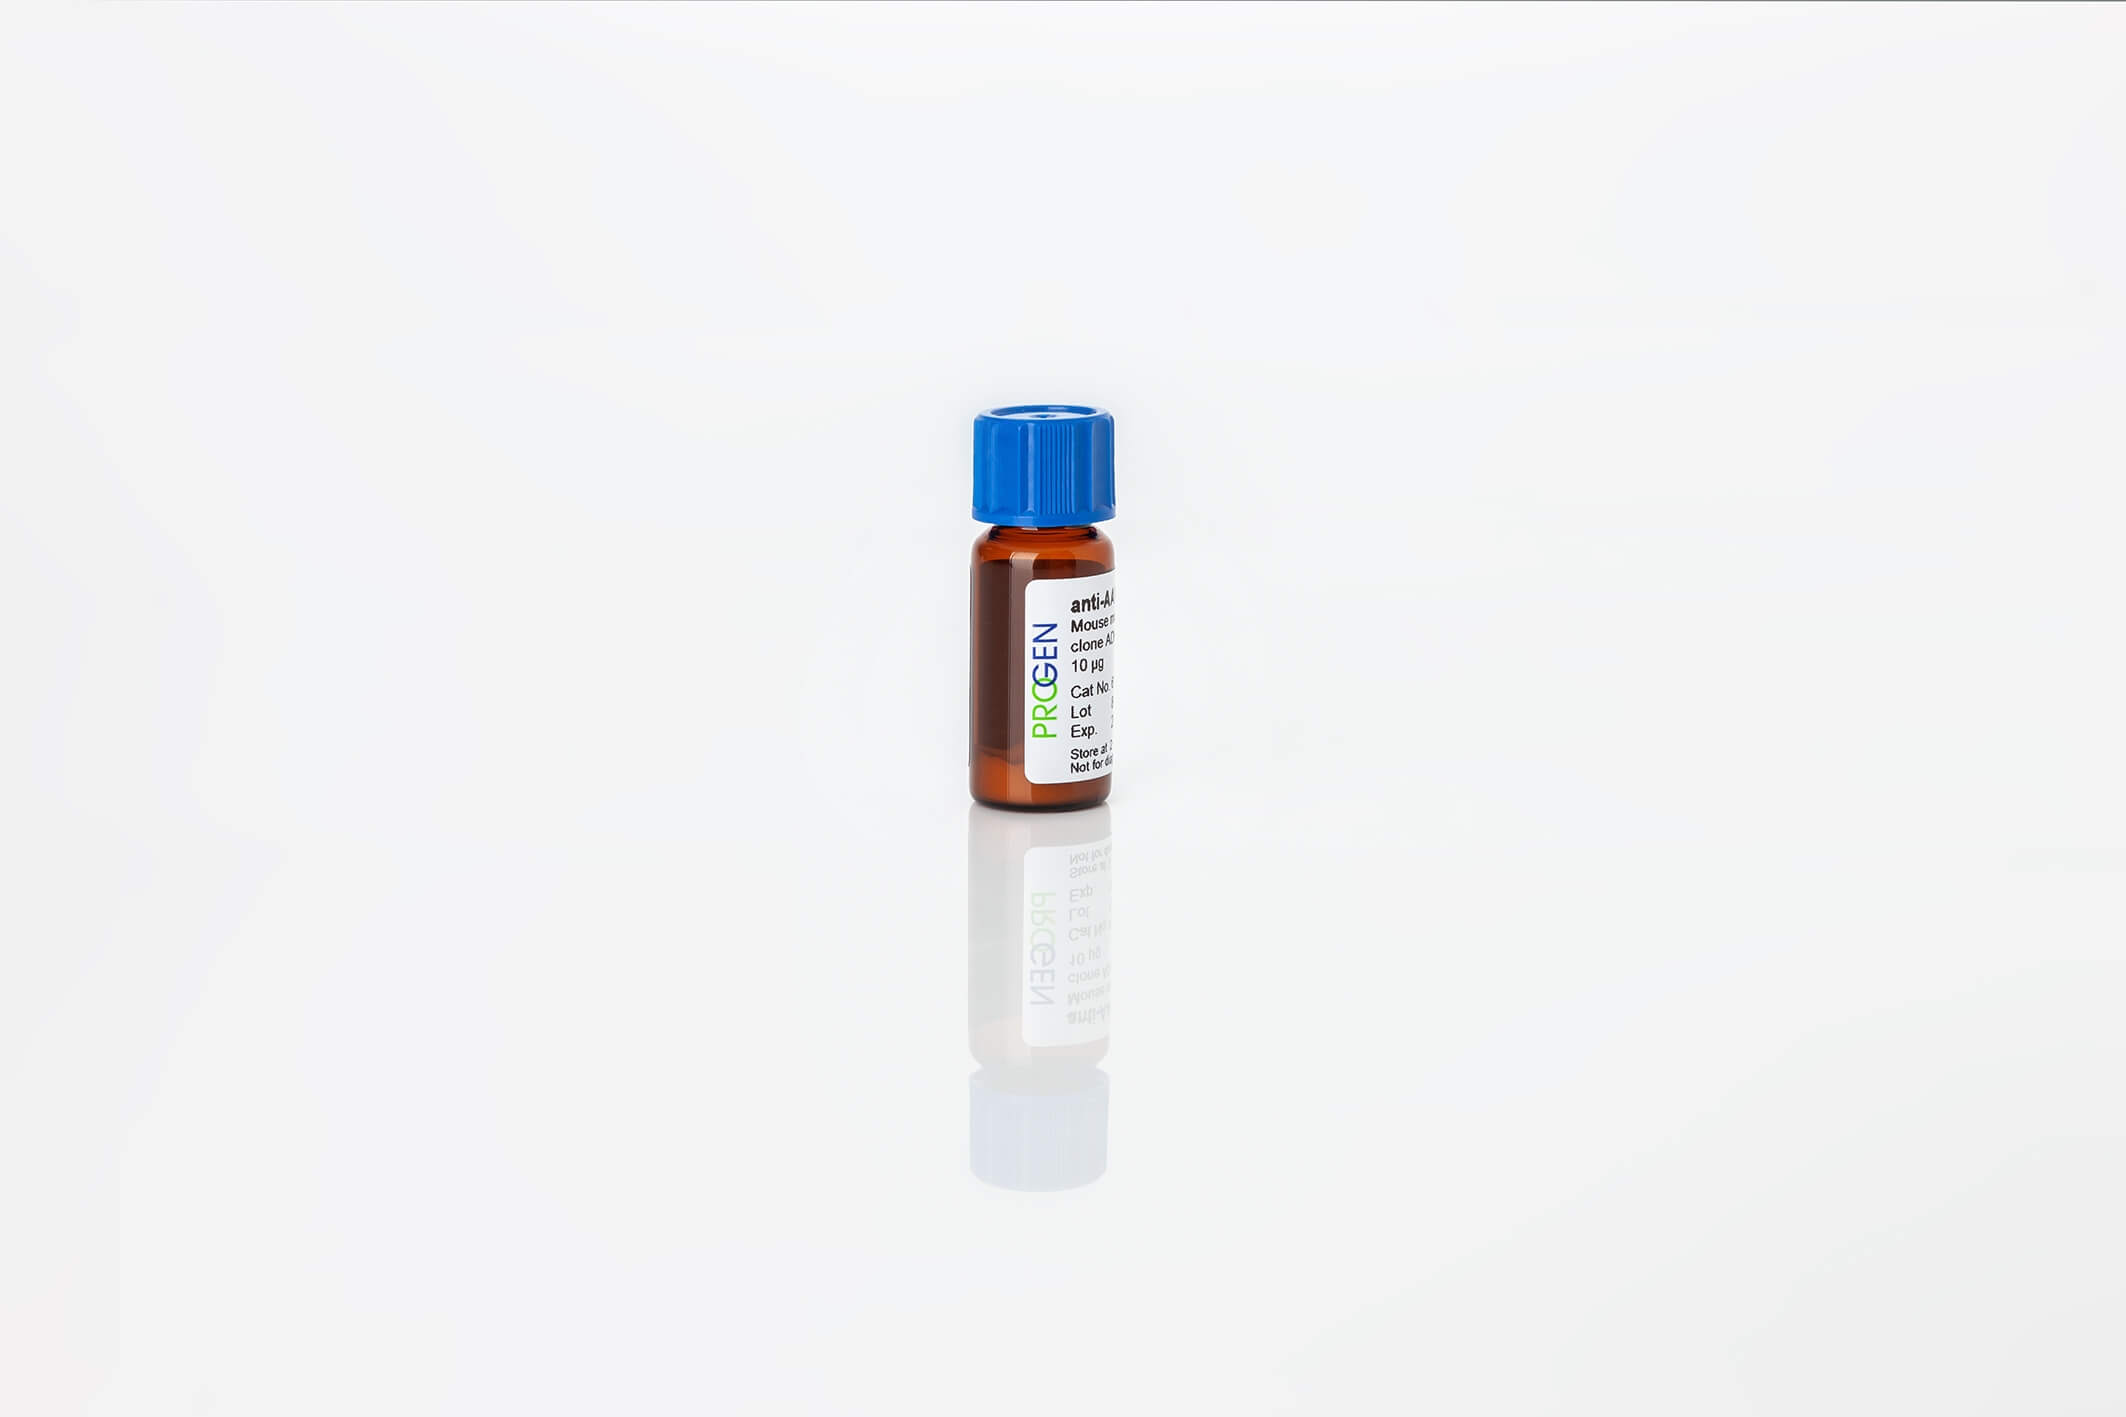 anti-Complement C1q mouse monoclonal, 242G3, lyophilized, purified